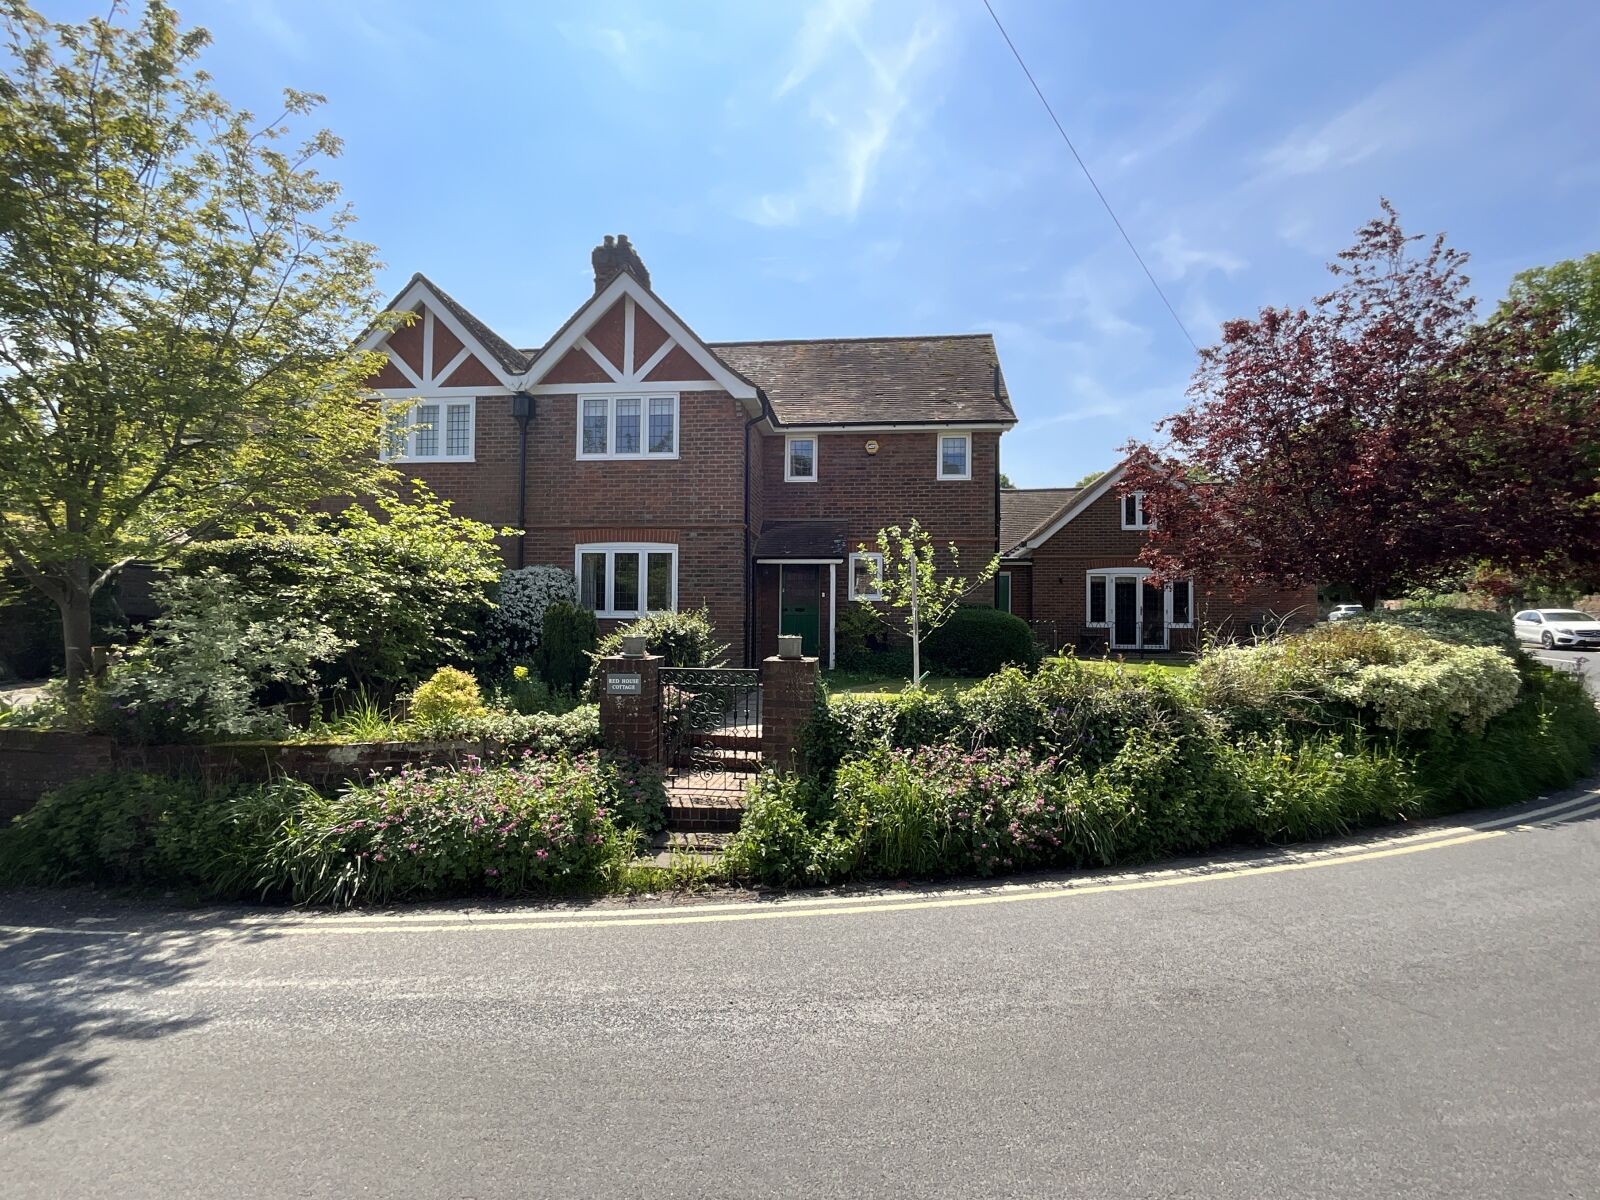 4 bedroom semi detached house for sale Pearson Road, Sonning, RG4, main image